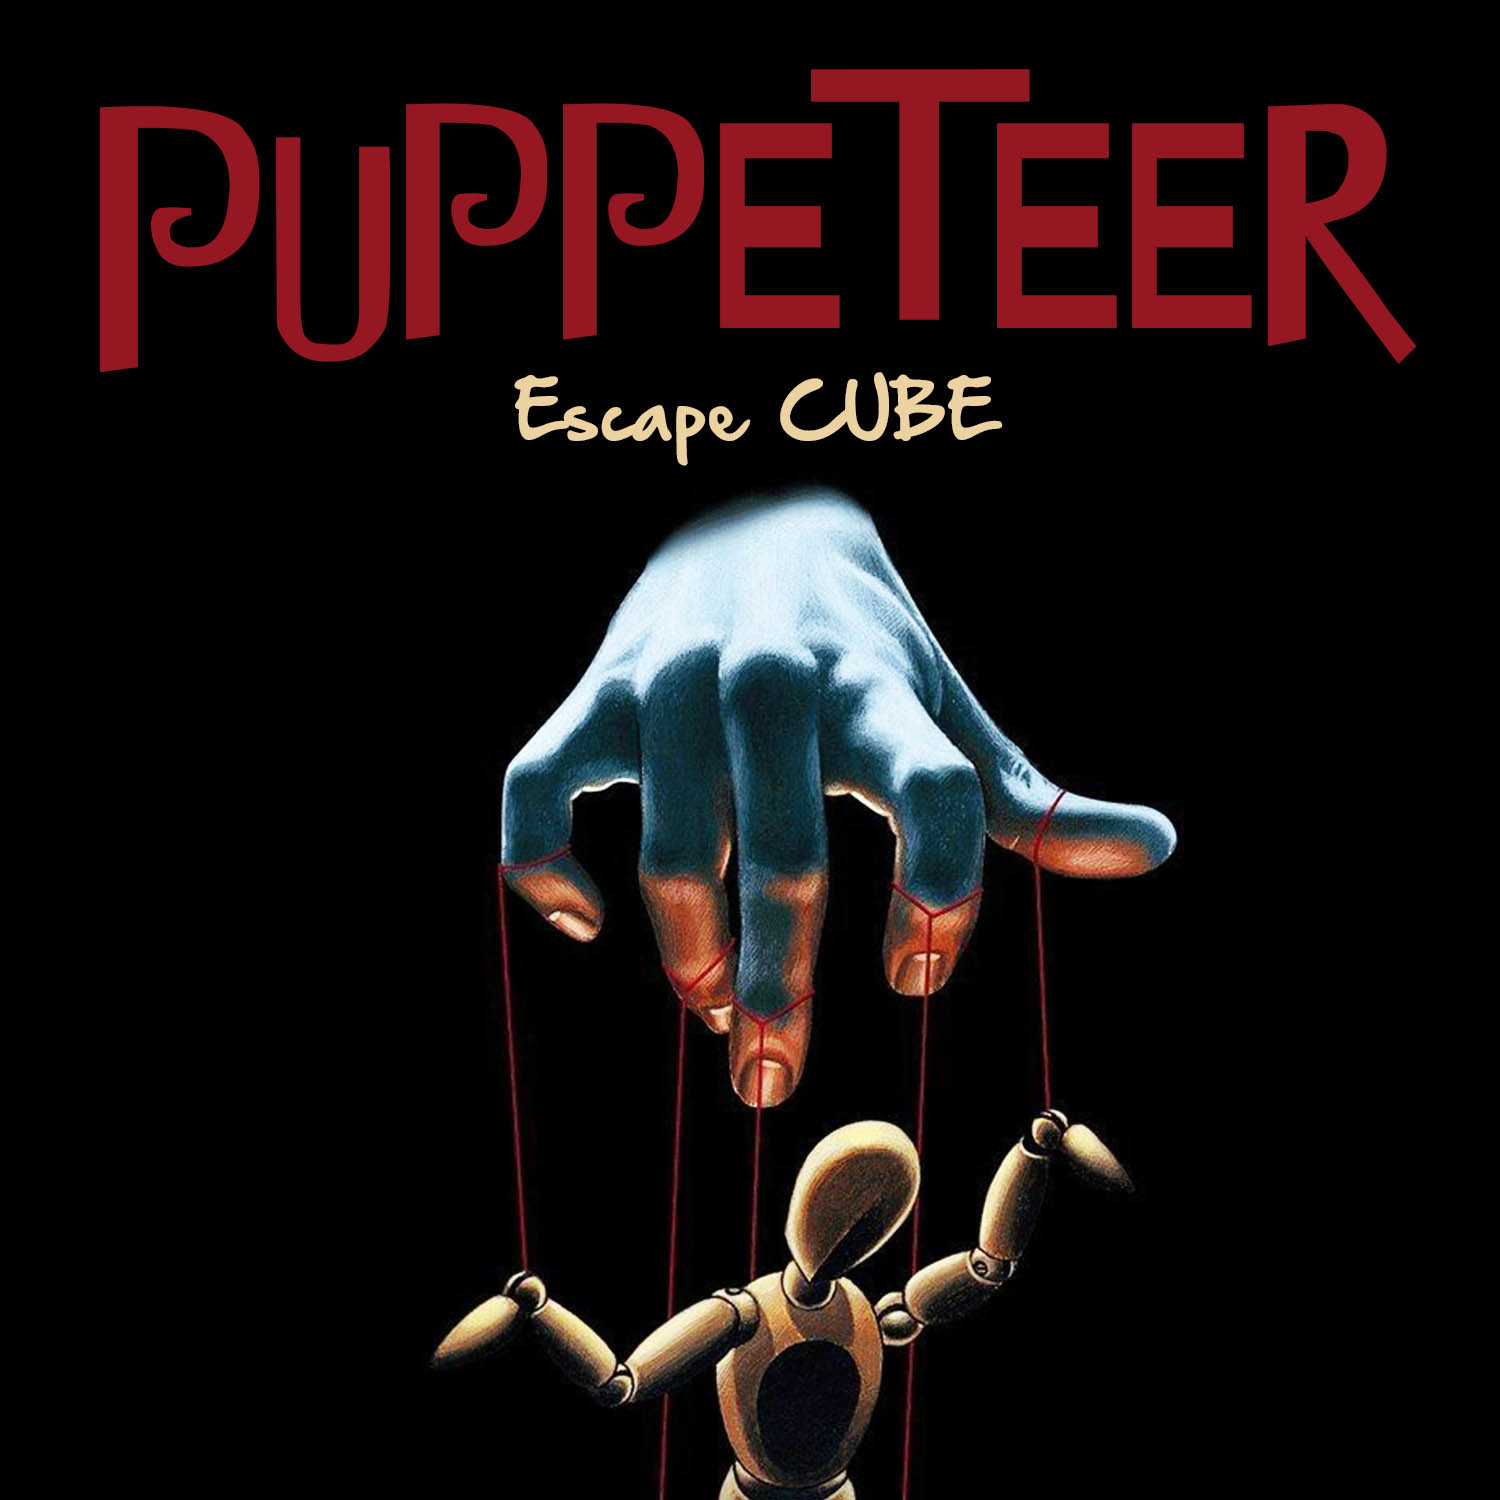 puppeteer-escape-cube-100-ready-to-play-escape-room-open-horror